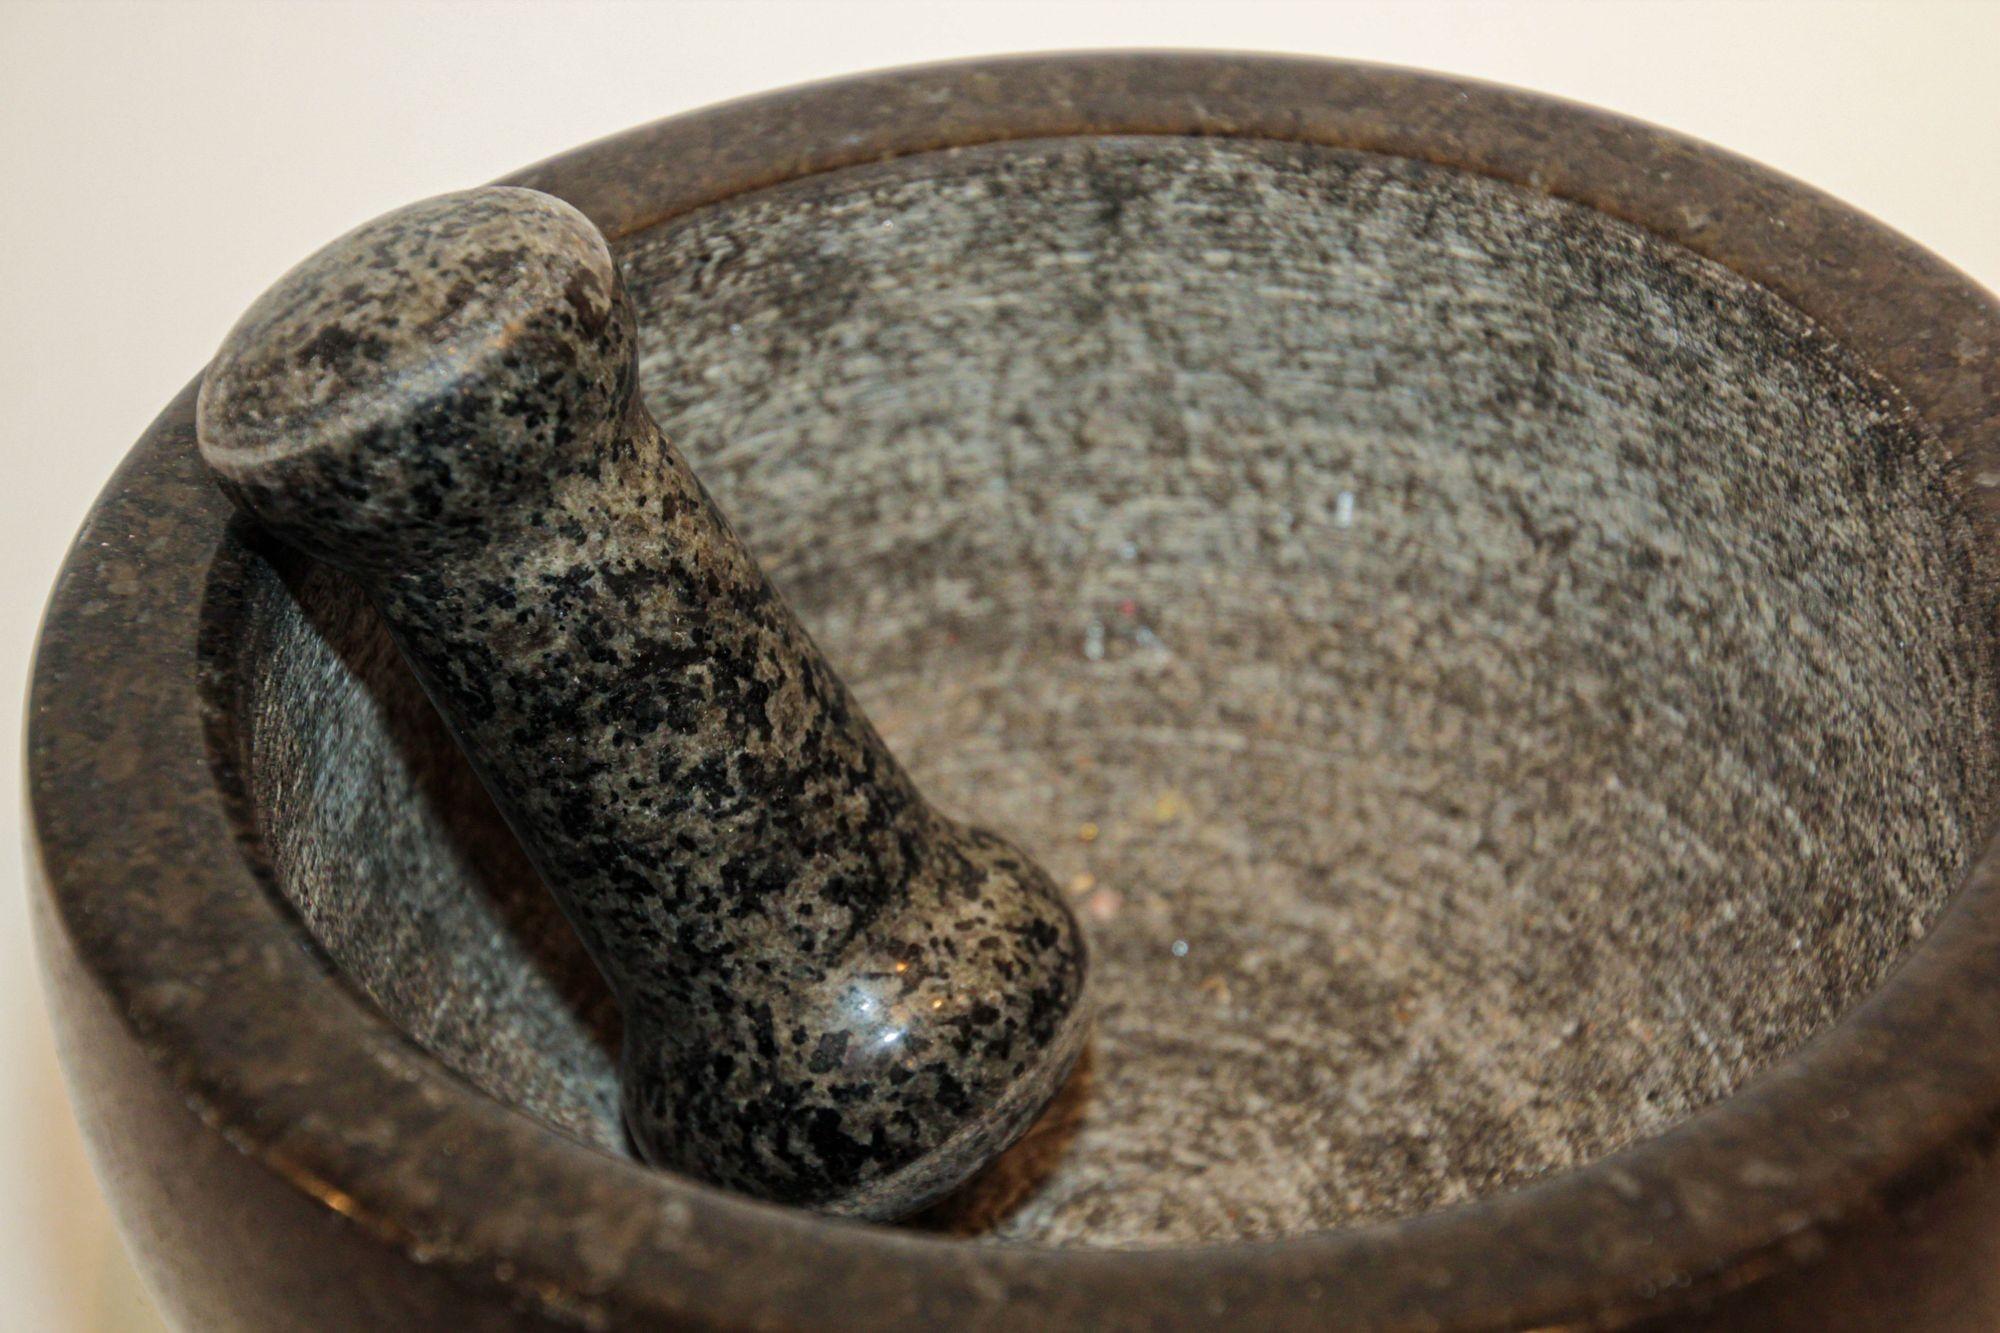 Italian deep black polished marble giant mortar bowl and pestle.
Mortar and pestle set has been used for thousand of years as the way to crush, grind and powder herbs and dry spices.
The traditional manual grinding method ensures that all cooking